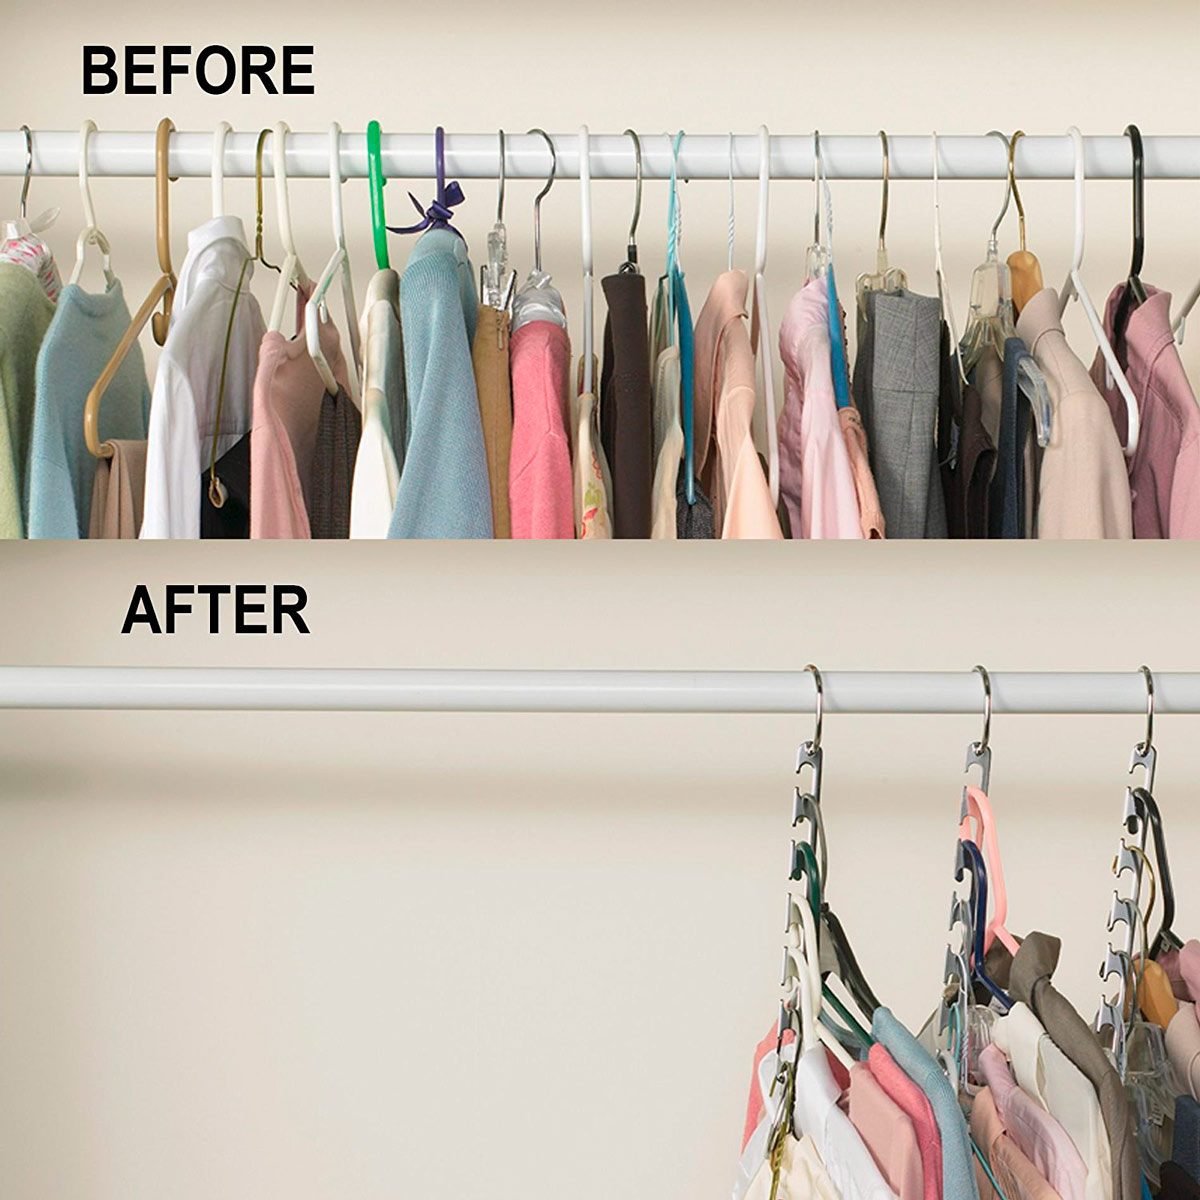 18 Before and After Photos That Will Inspire You to Get Organized